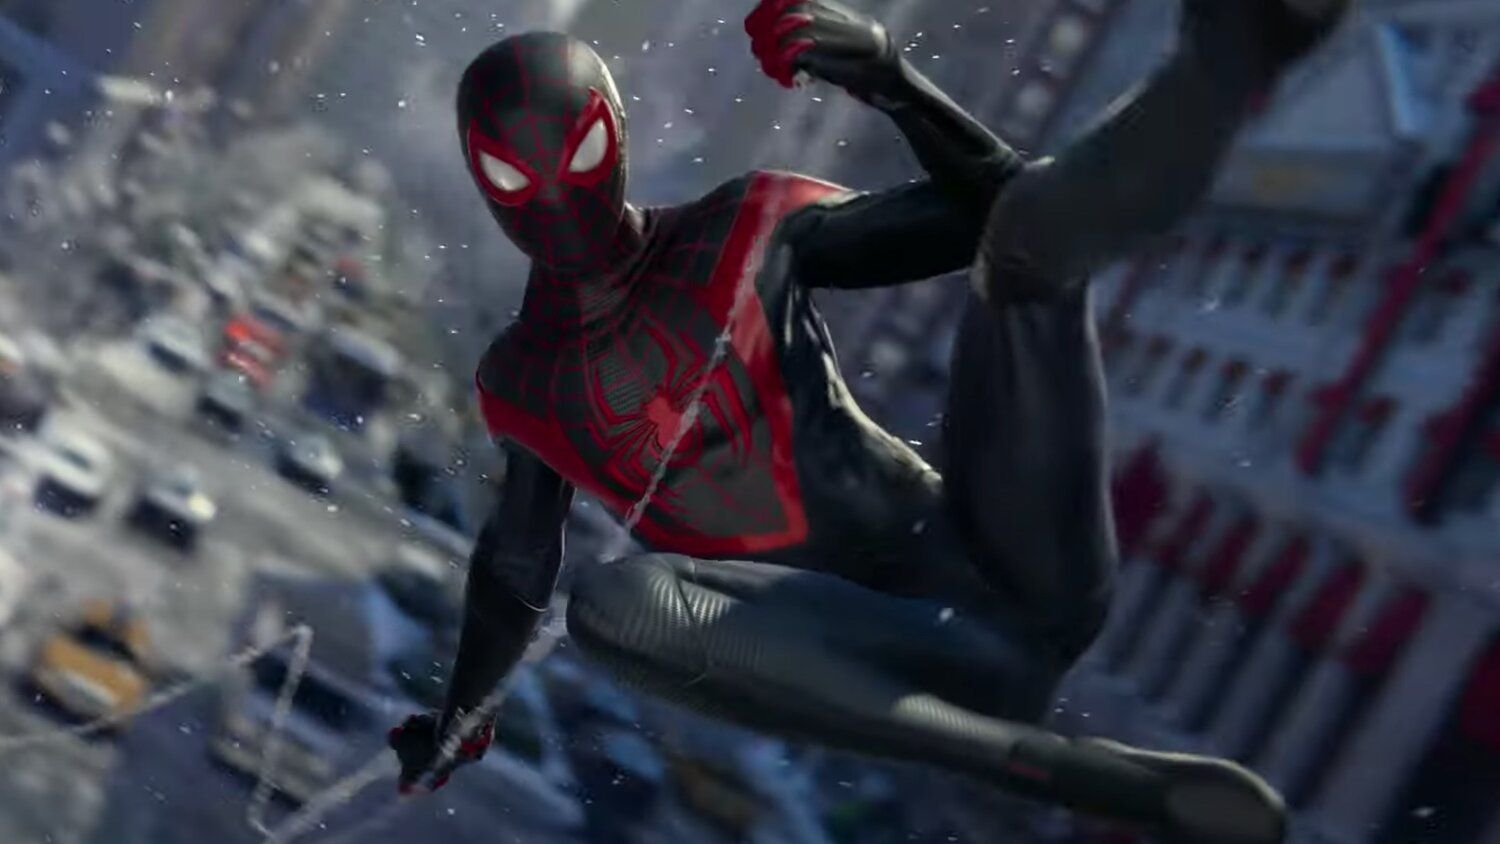 Spider Man: Miles Morales Is A Standalone Game Coming To PS5 This Holiday Season